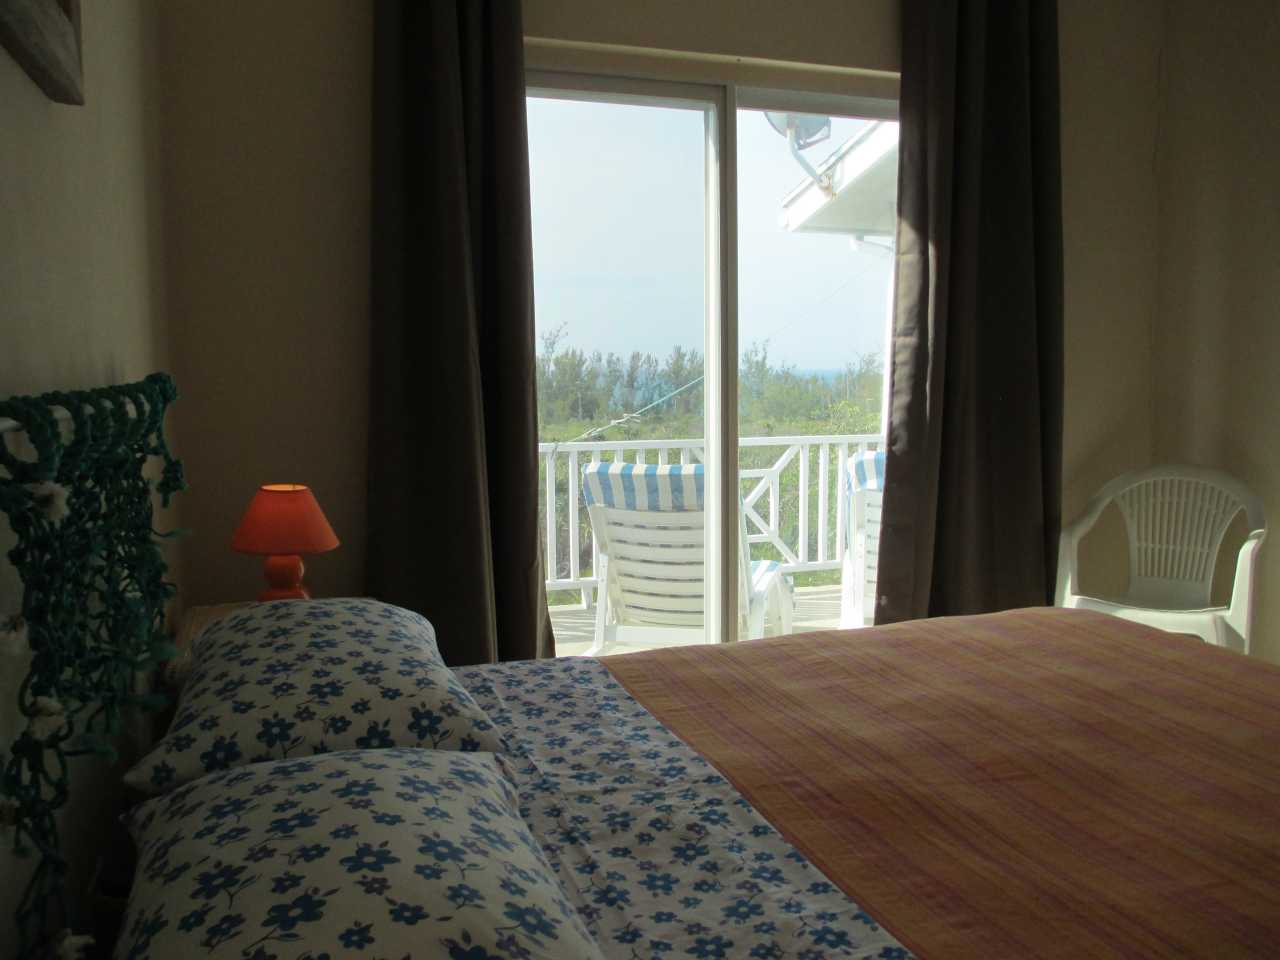 View from the main bedroom